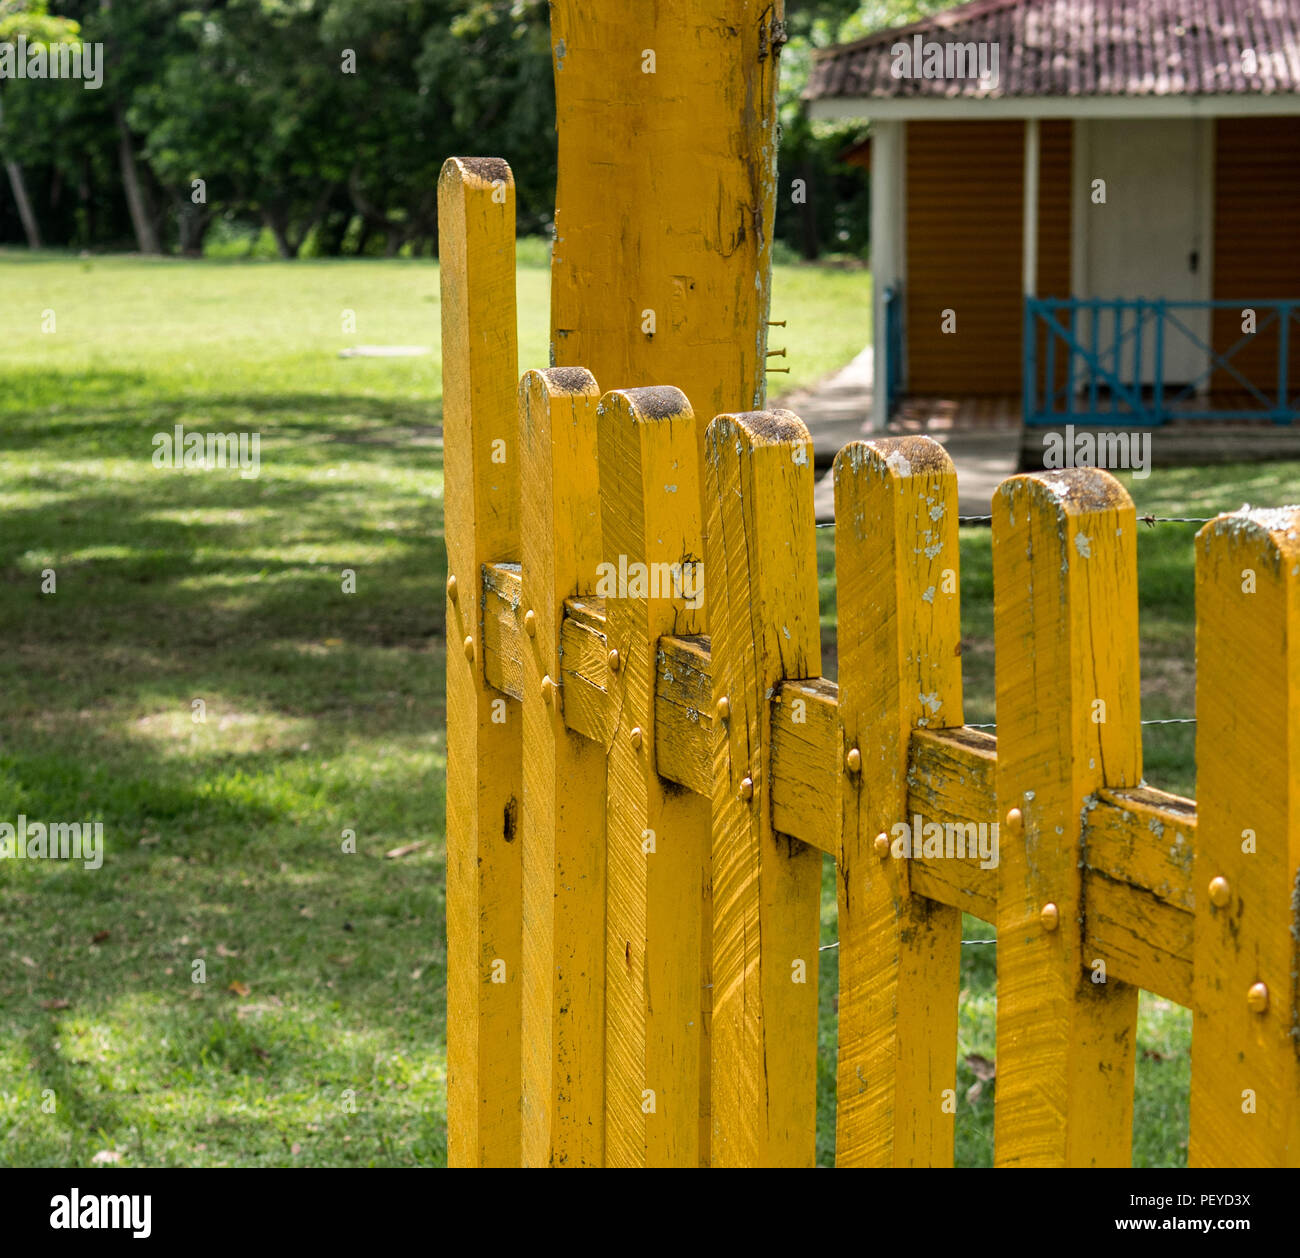 Birán, Cuba - September 1, 2017: A yellow painted fence on the plantation where Fidel Castro was born. Partial view of the guest hotel can be seen in  Stock Photo